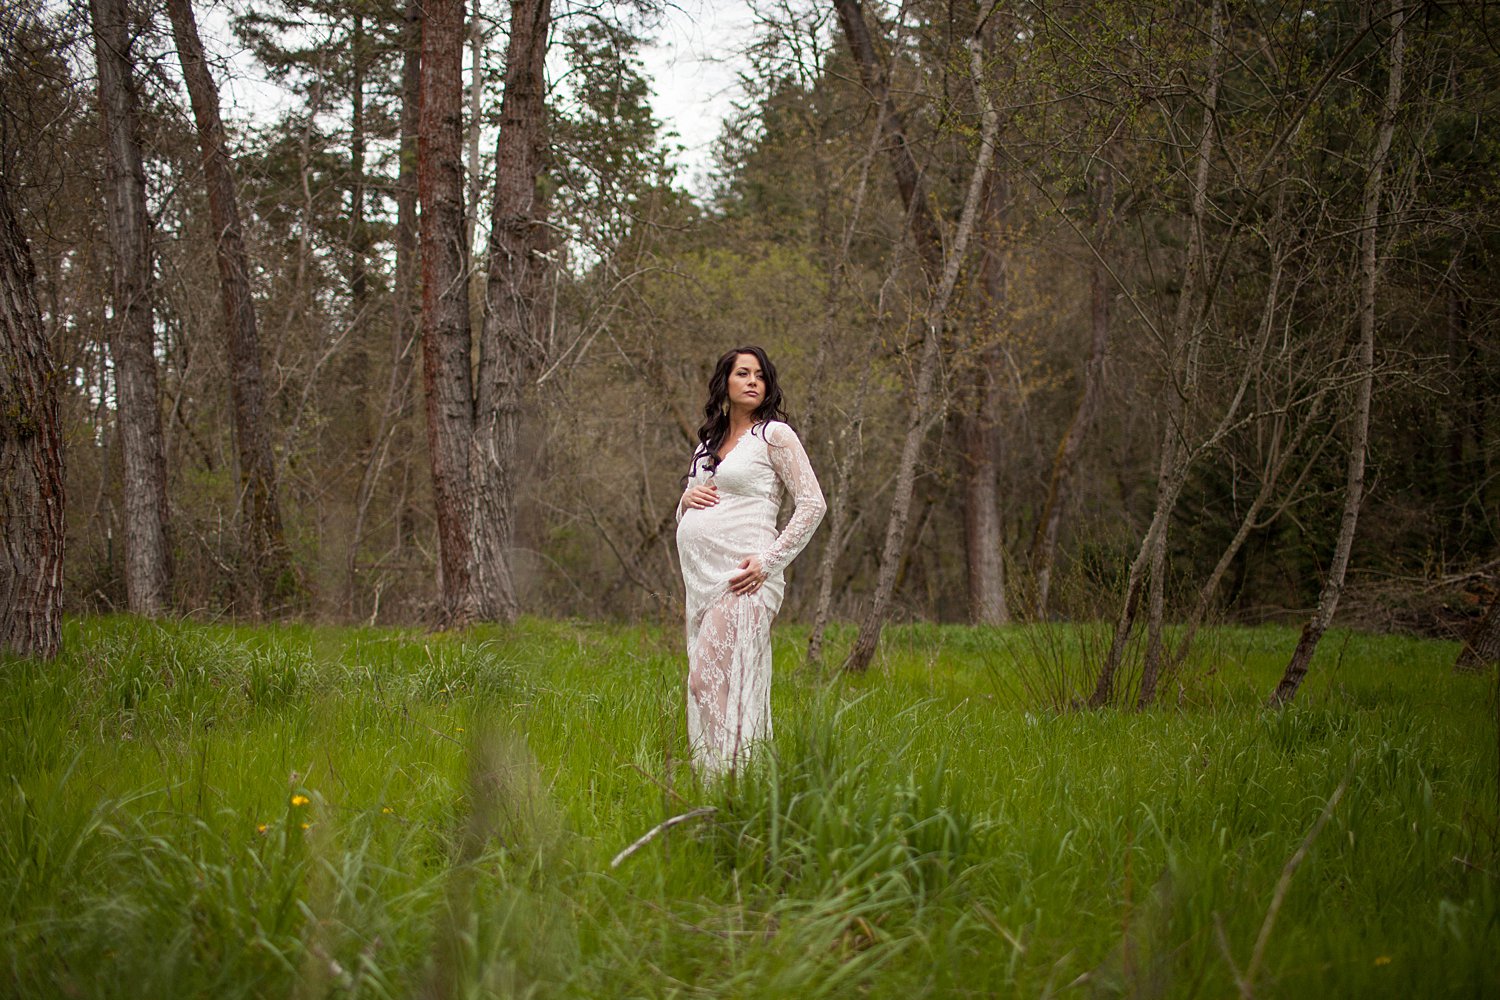 pregnant woman in grass field wearing white lace dress